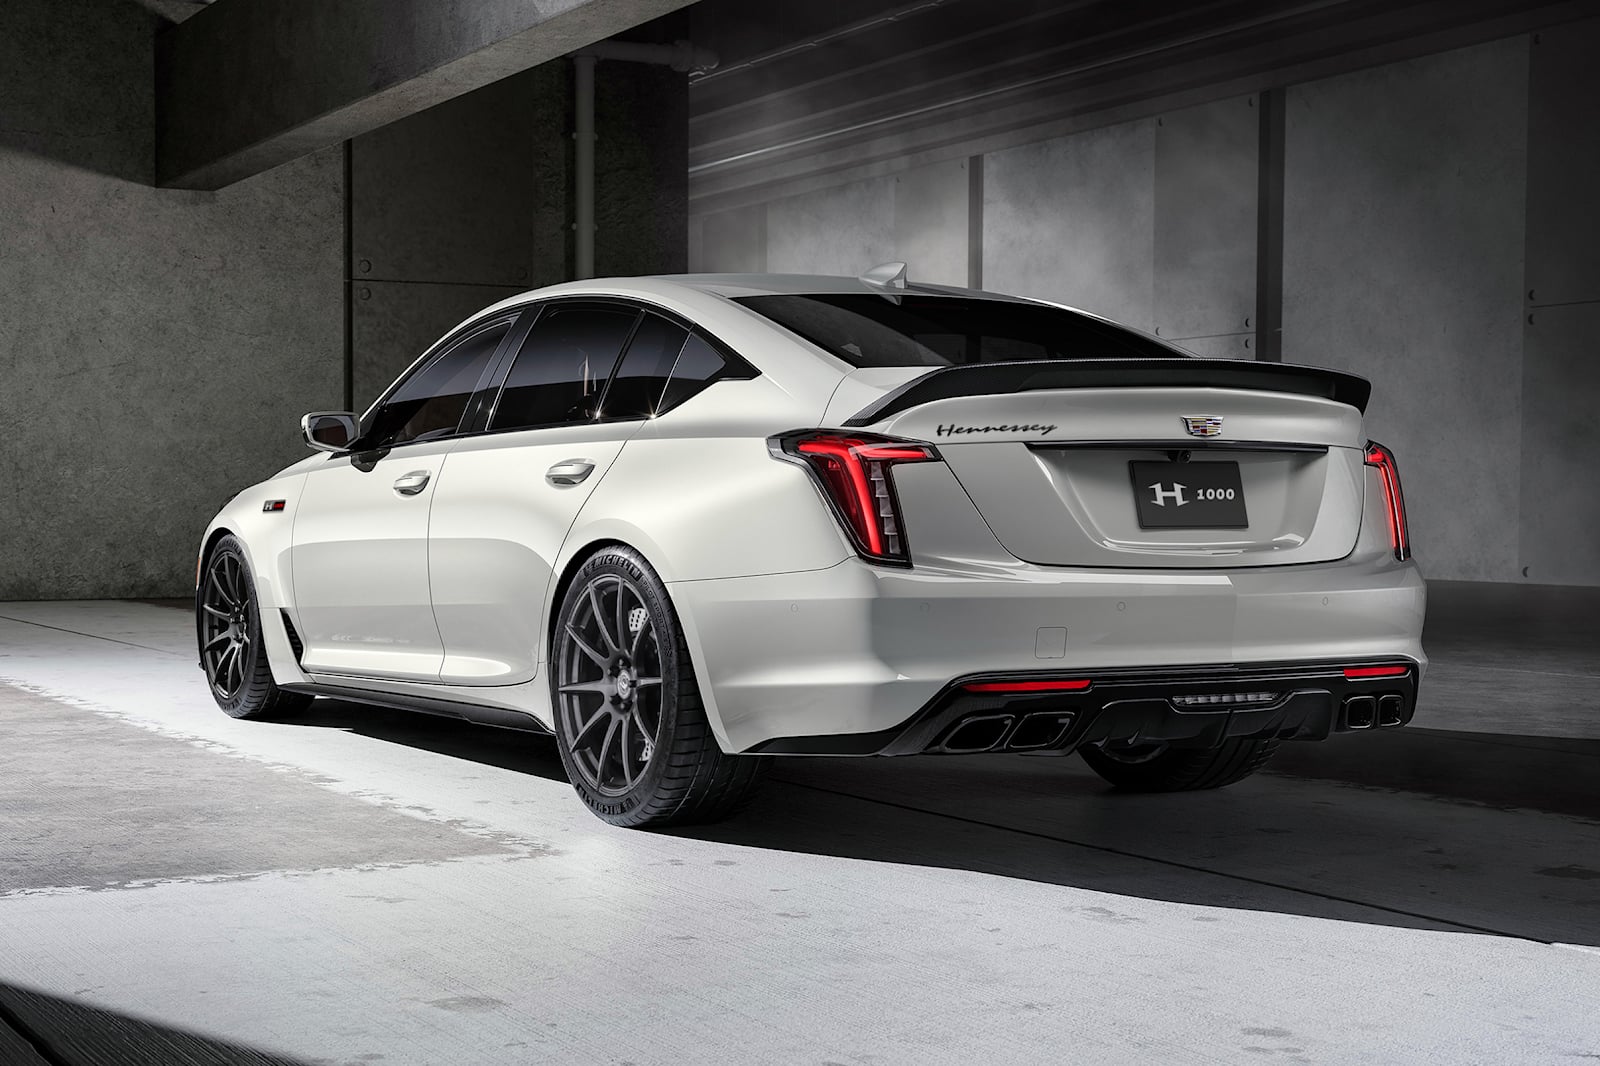 Cadillac CT5V Blackwing Transformed Into 1,000HP HyperMuscle Car